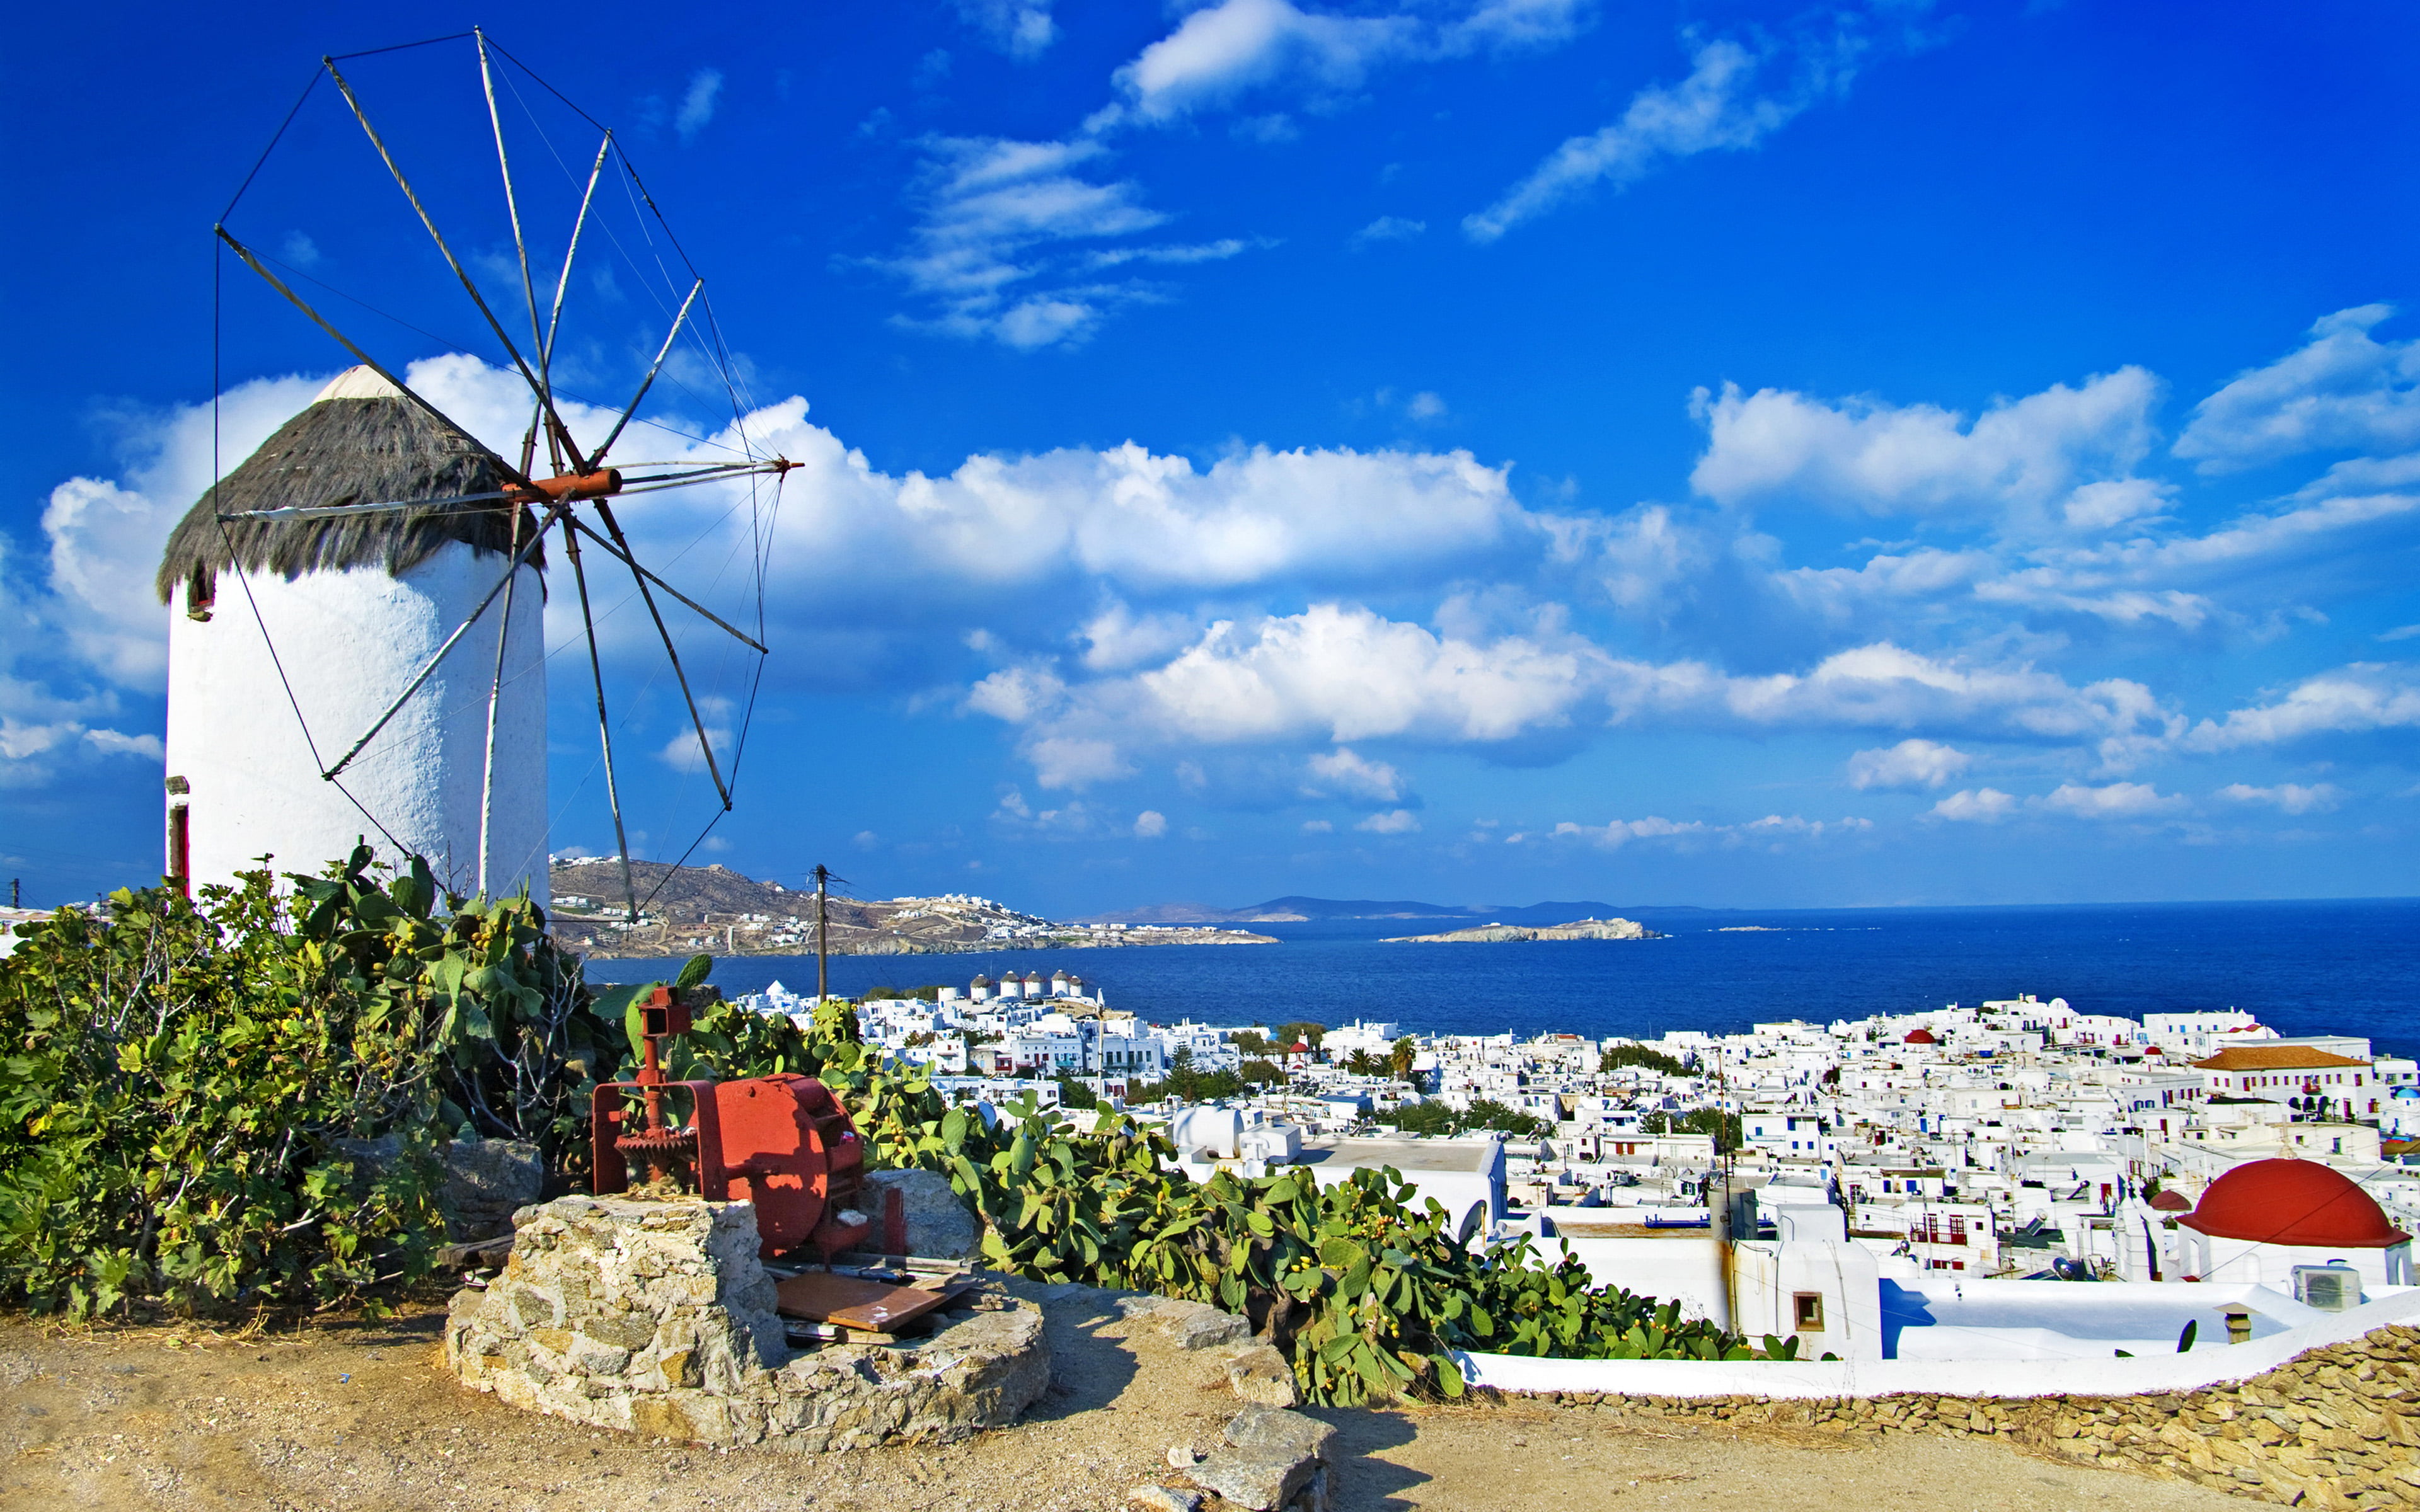 Mykonos Island And Greece In The Cyclades Aegean Sea Windmills Of The 16th Century Desktop Hd Wallpaper For Mobile Phones Tablet And Pc 3840×2400